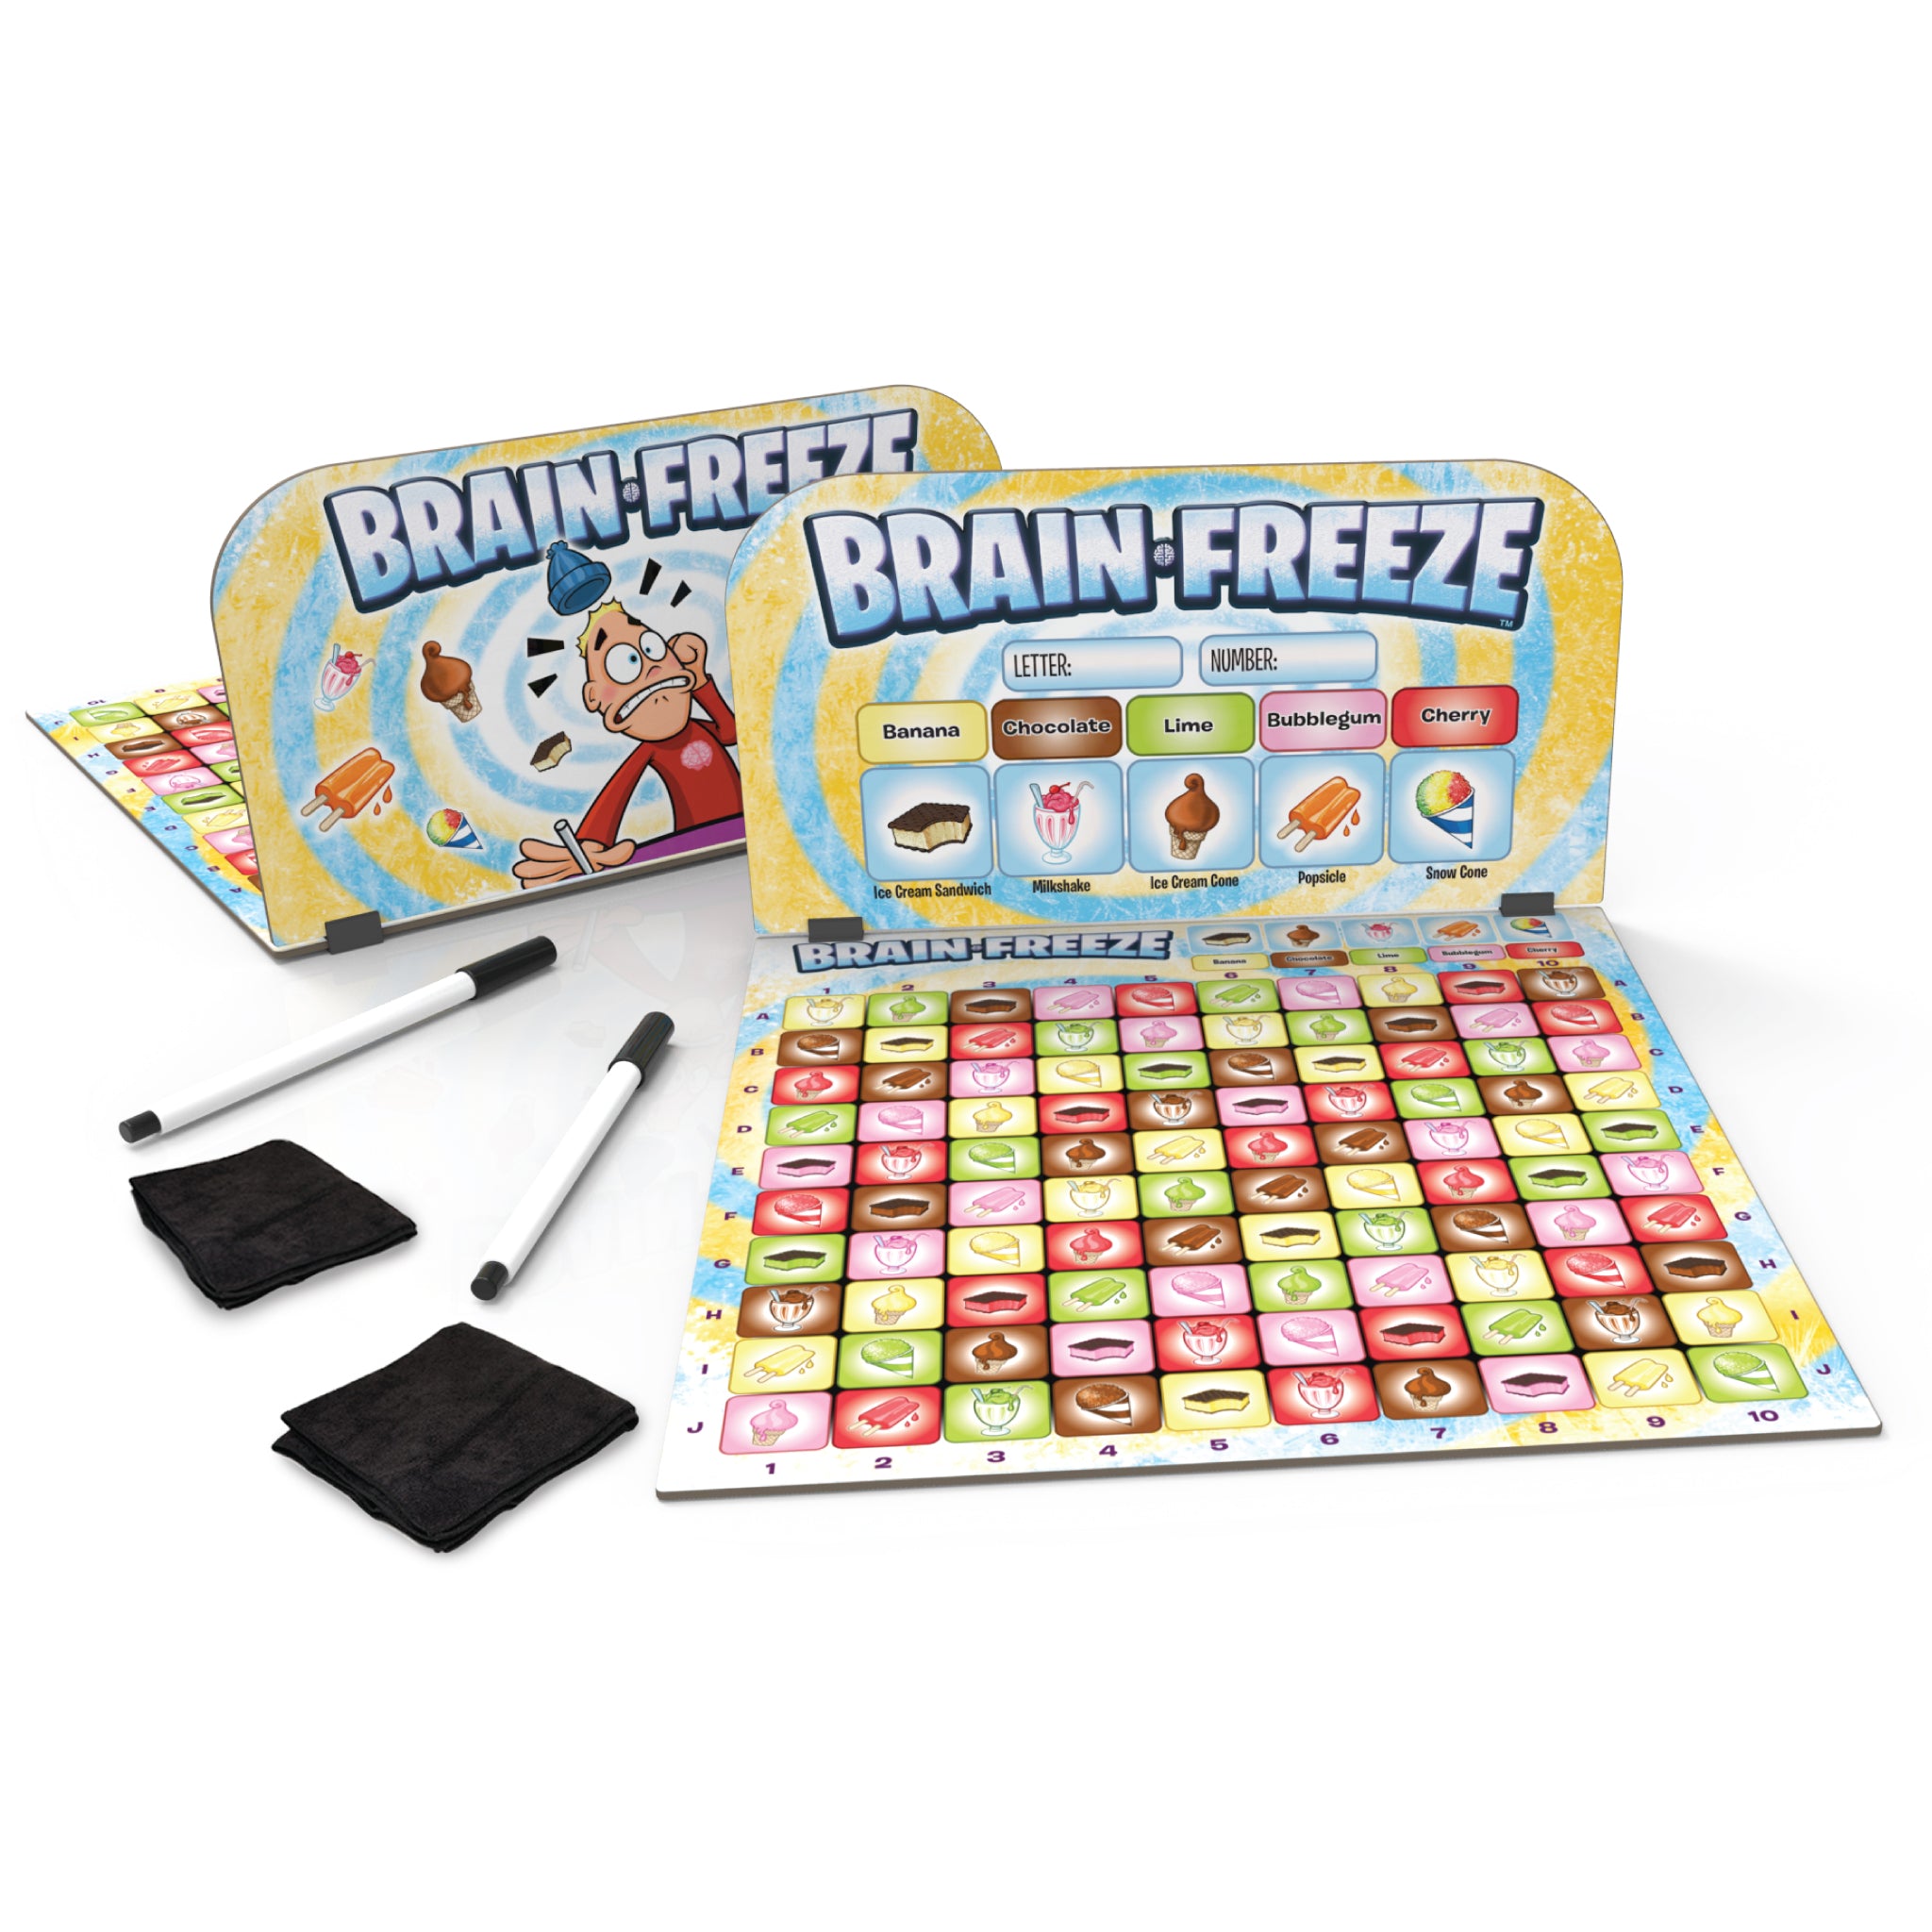 Brain Freeze Strategy board game for kids by Mighty Fun! Ages 5 up.